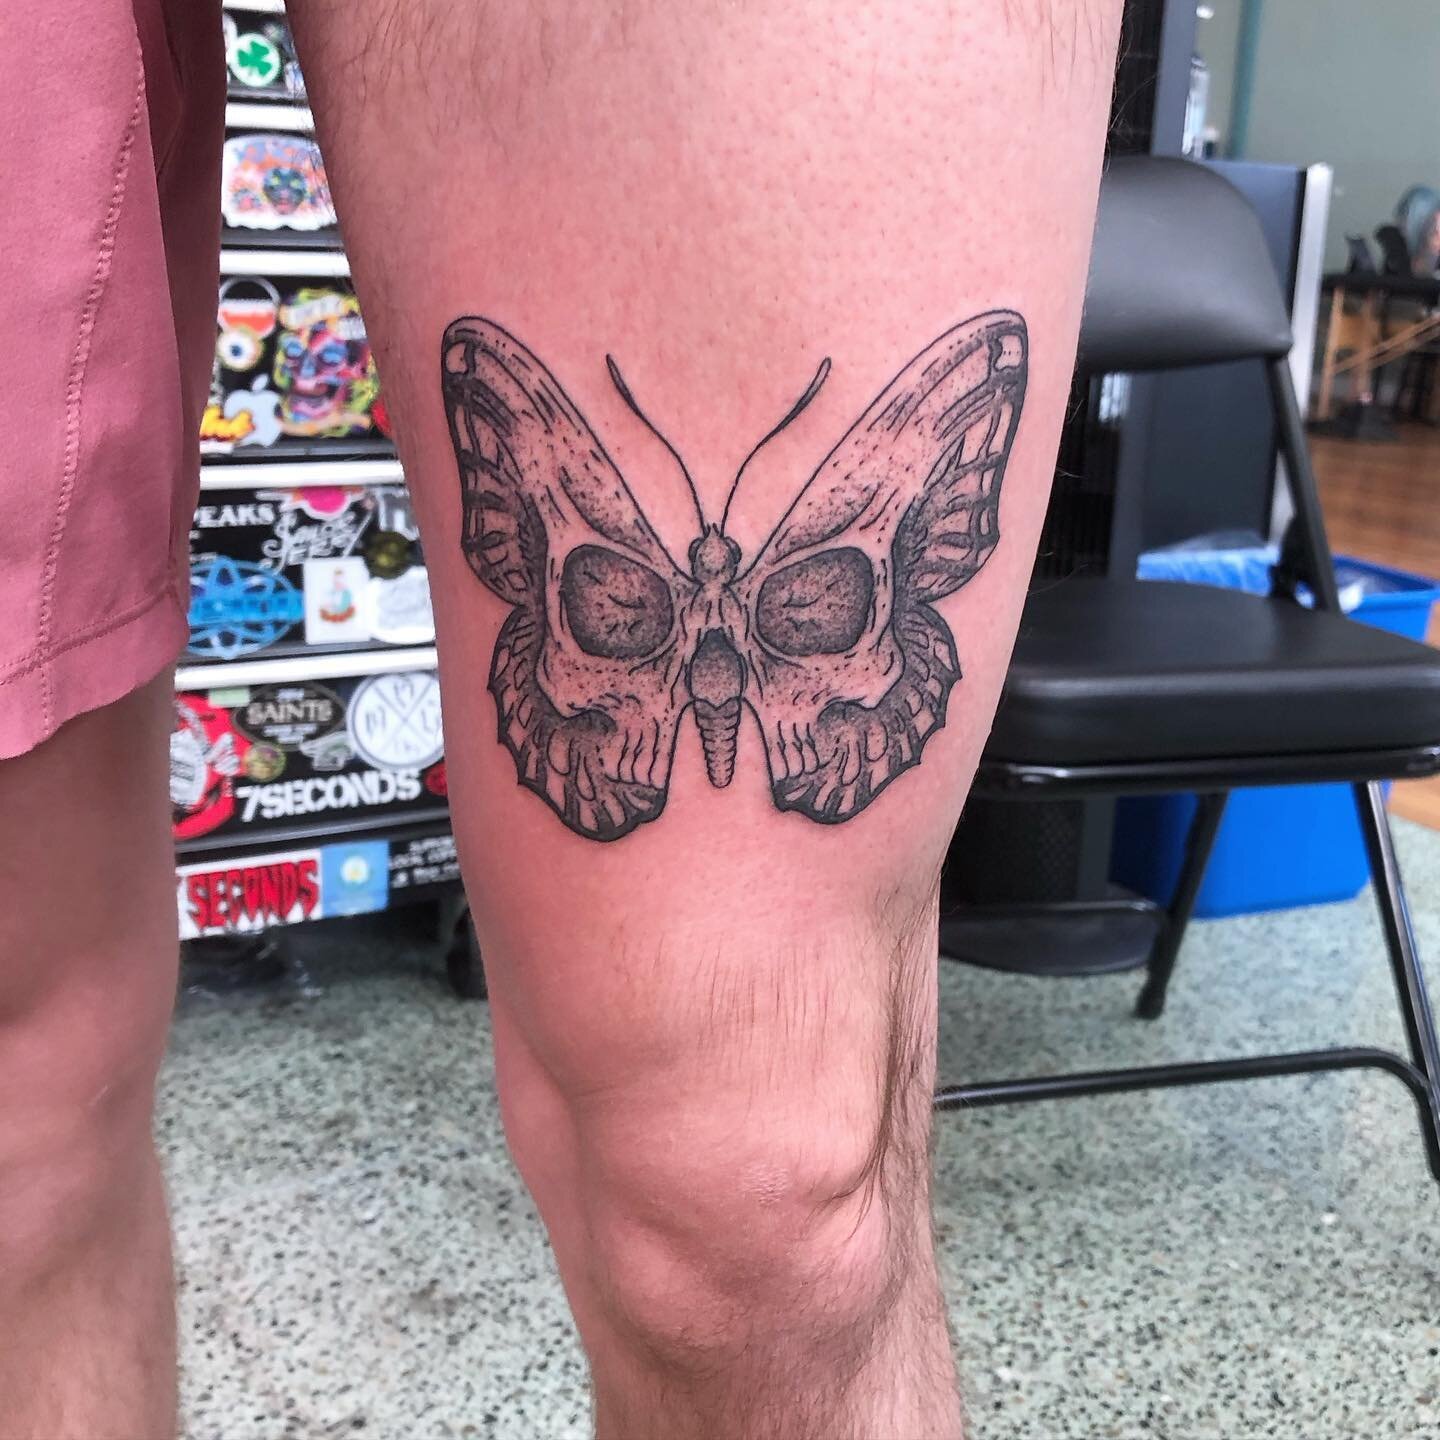 Skull butterfly 💀🦋 *Go to www.alchemytattoocollective.com to book an appointment now!
*DM @tattoosbyjw for tattoos designs and availability. ⚜️
*Email- Tattoosbyjw87@gmail.com
 11am-7pm
 Monday-Saturday 

#butterflytattoo #skulltattoo #thightattoo 